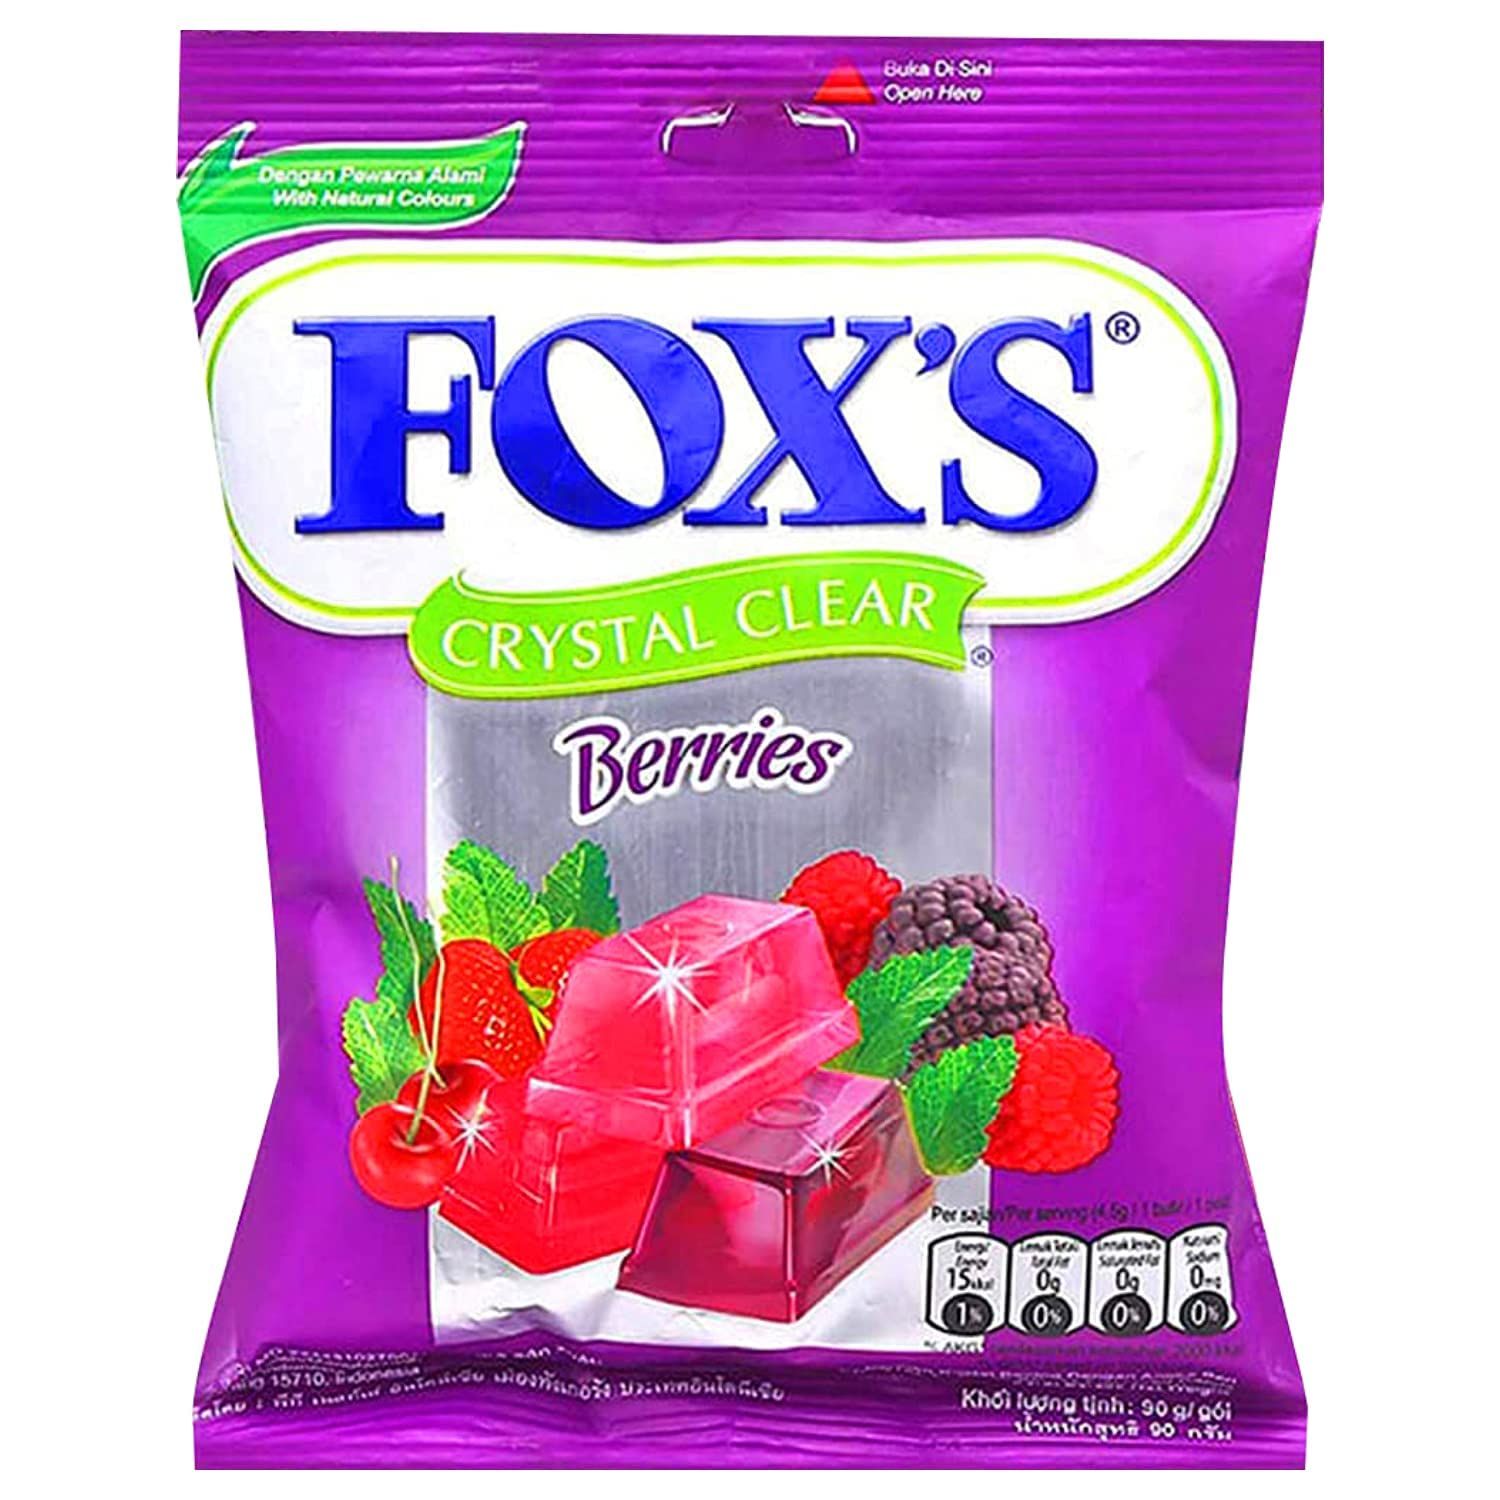 Fox's Crystal Clear Berries Image